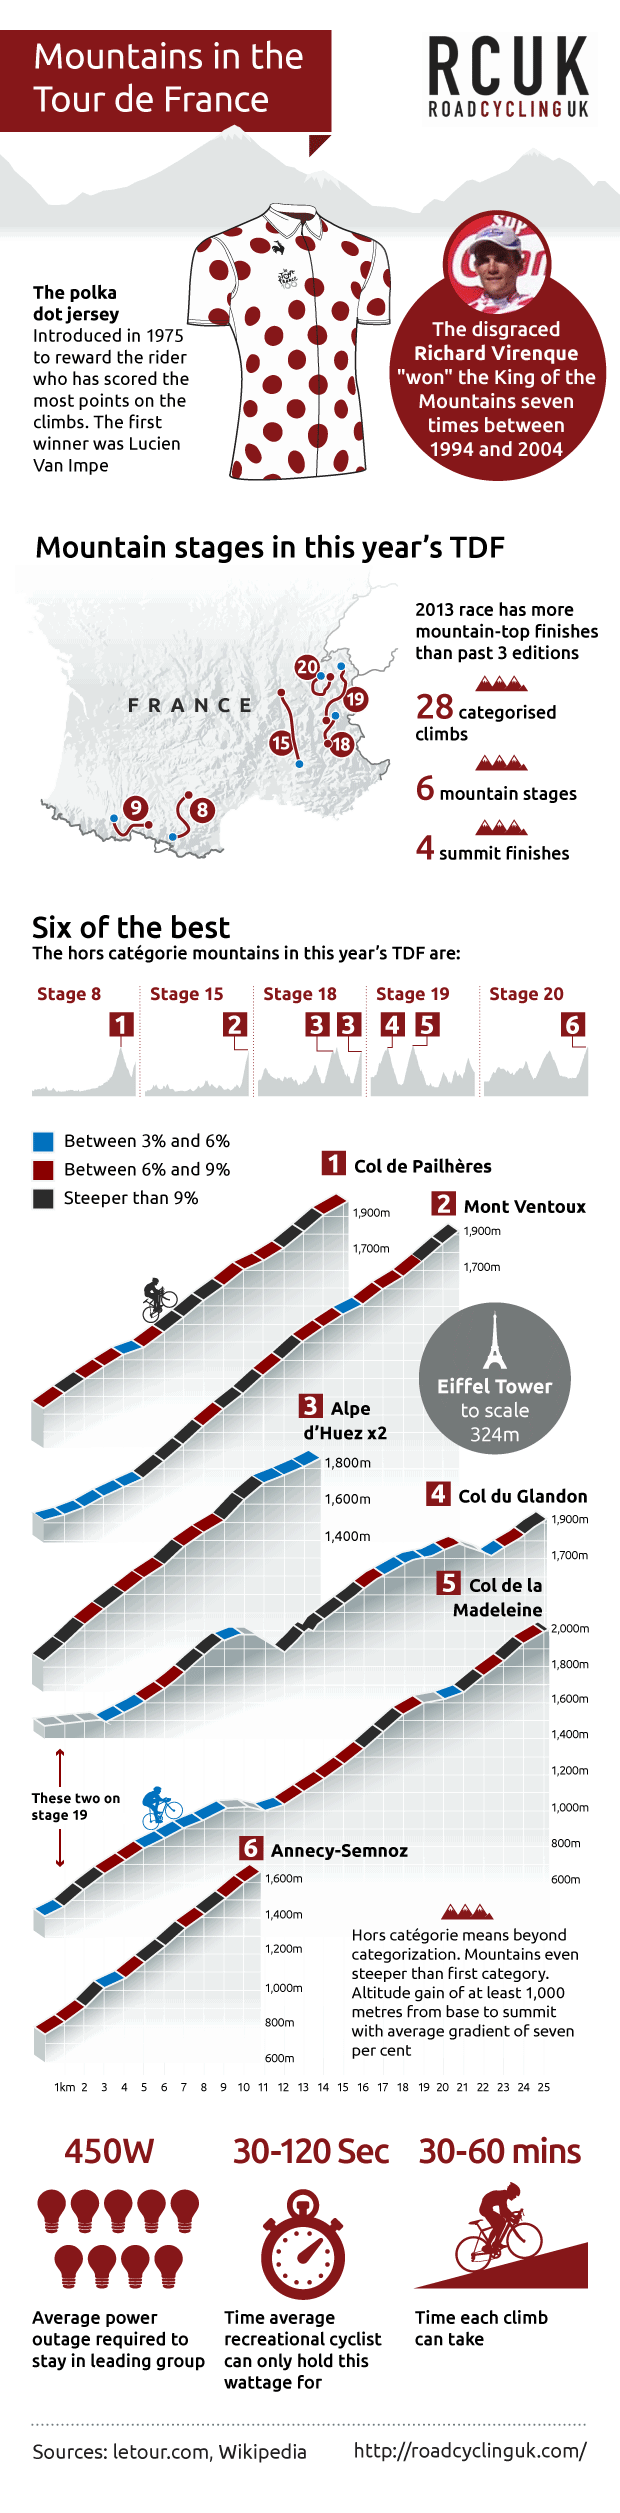 Tour de France 2013: infographic - the mountain stages by roadcyclinguk.com Infographic